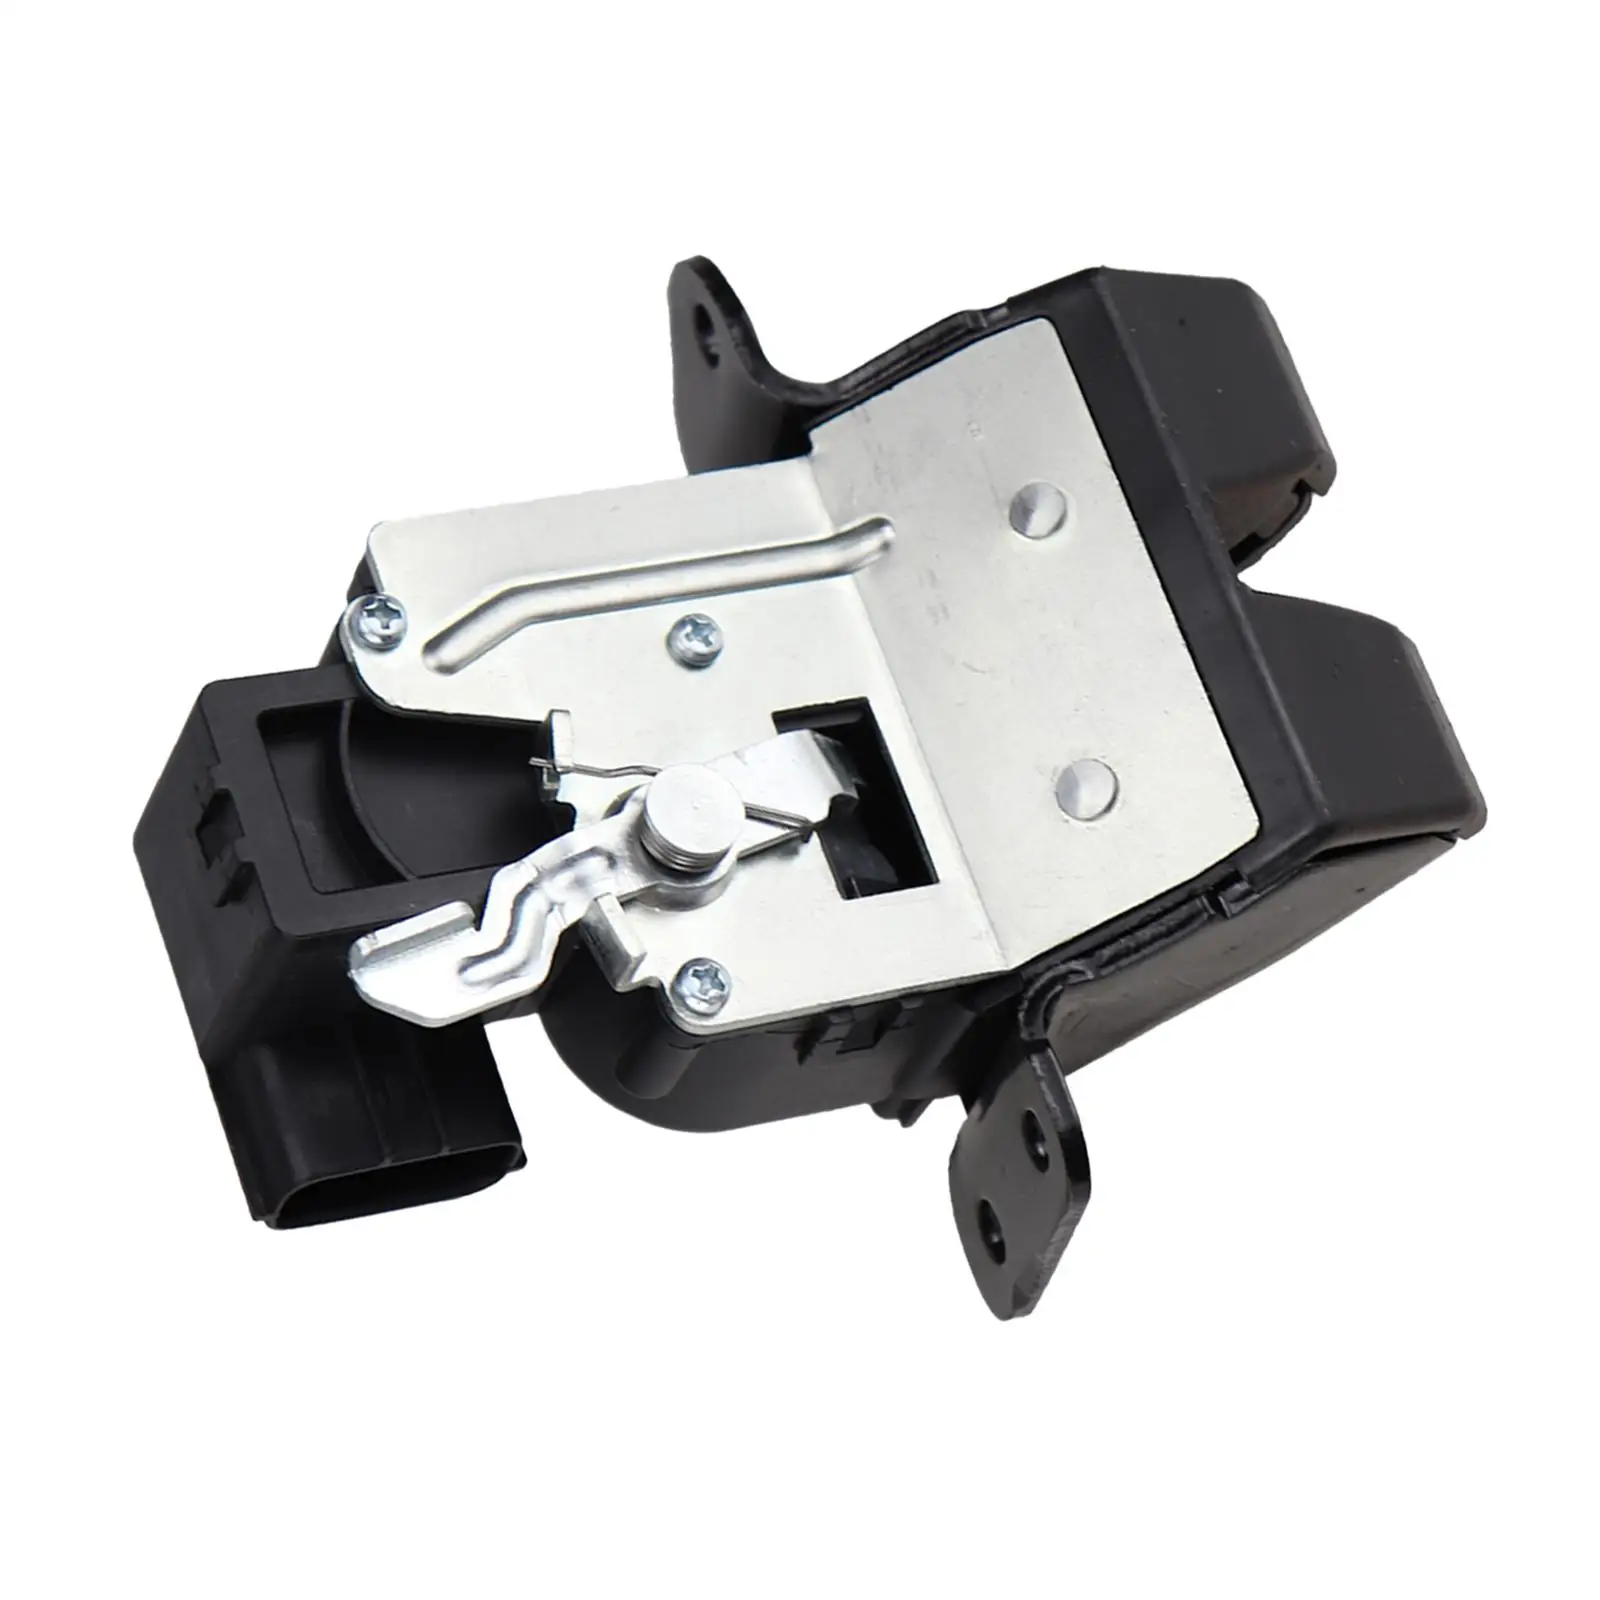 Tailgate Trunk Door Lock Actuator 81230A5000 for   GT i30 Replace Accessories Parts  Install